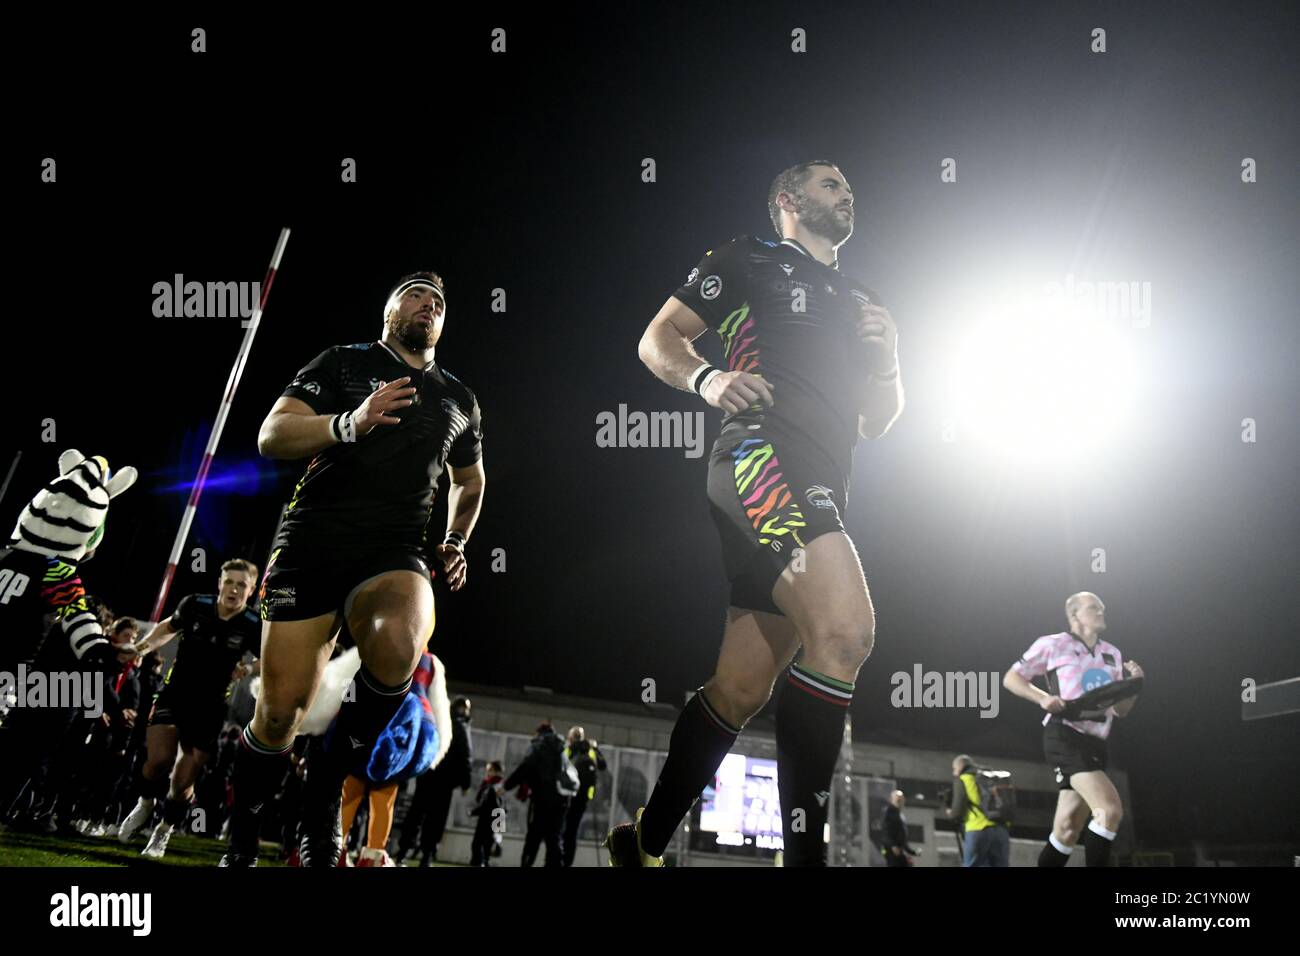 Munster's rugby players enter in the pitch during a Guinness Pro 14 match in Legnano. Stock Photo